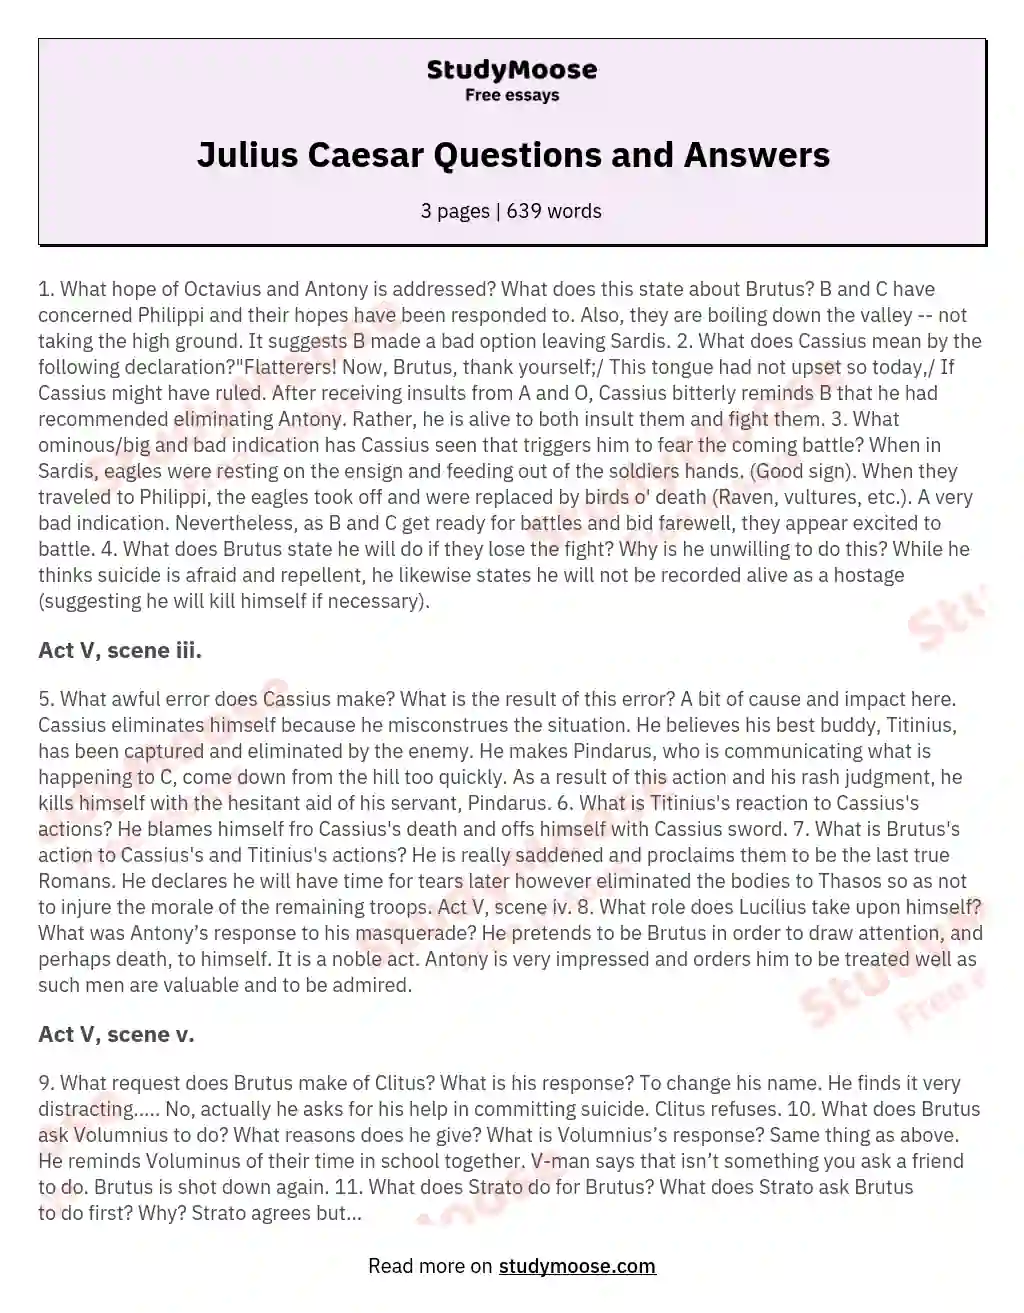 Julius Caesar Questions and Answers essay